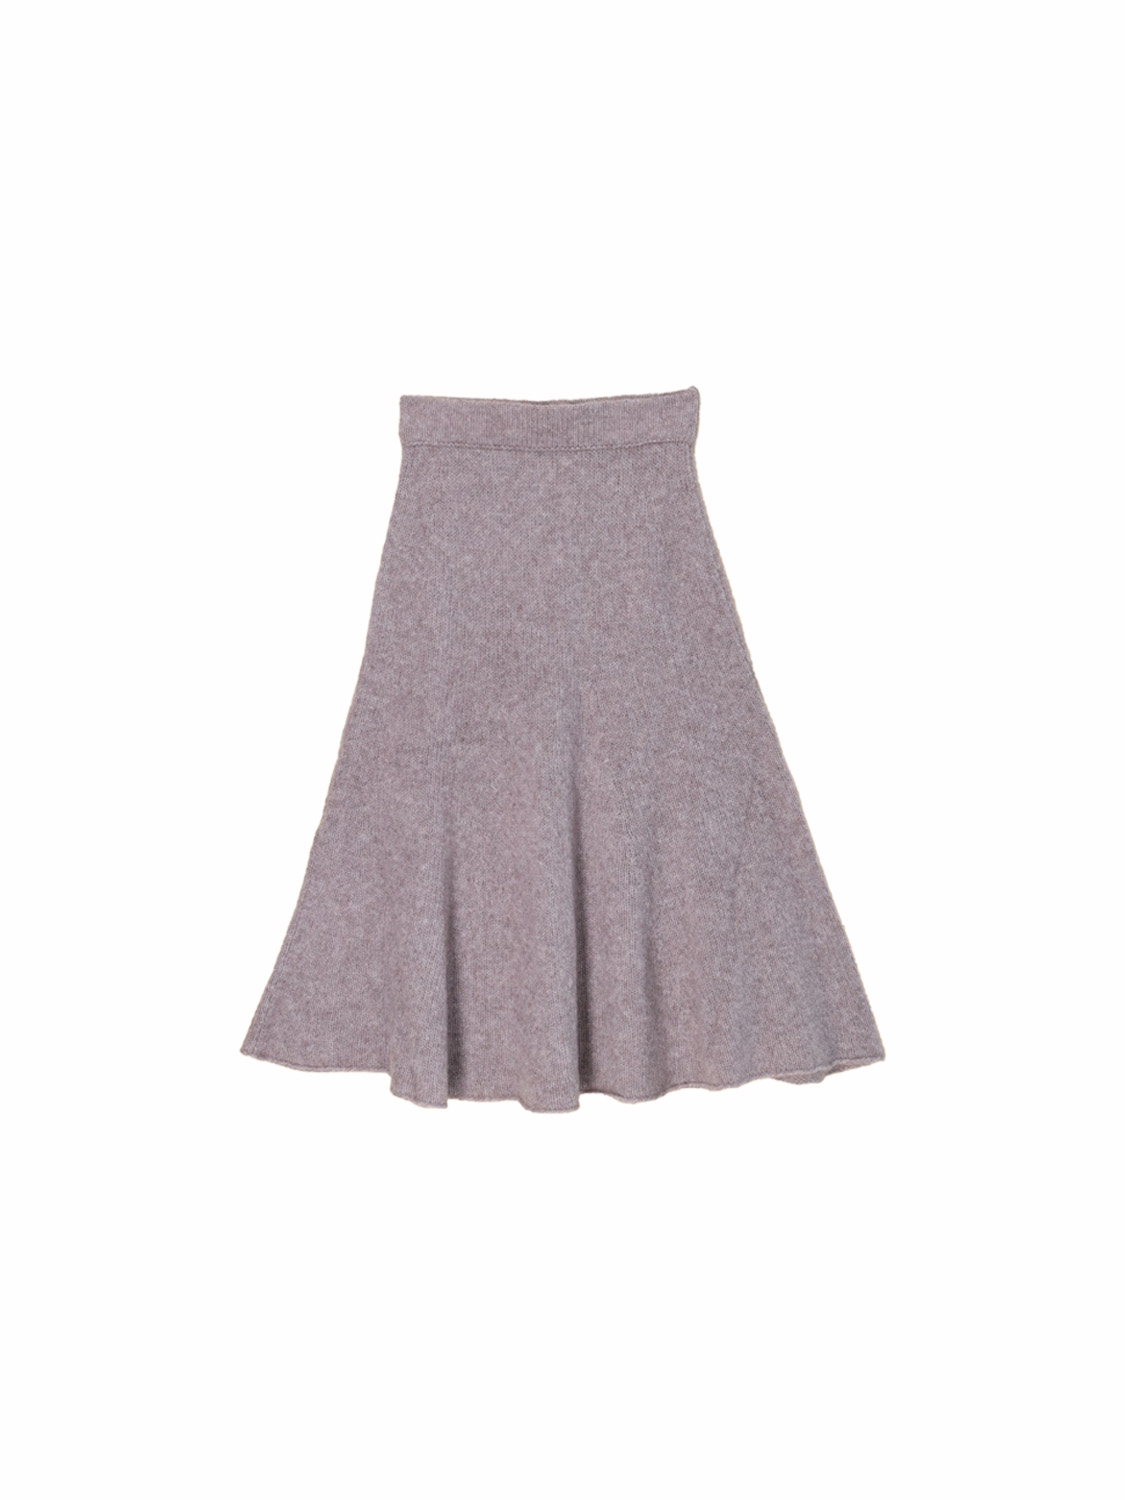 Carrie - Knit skirt with lurex details 